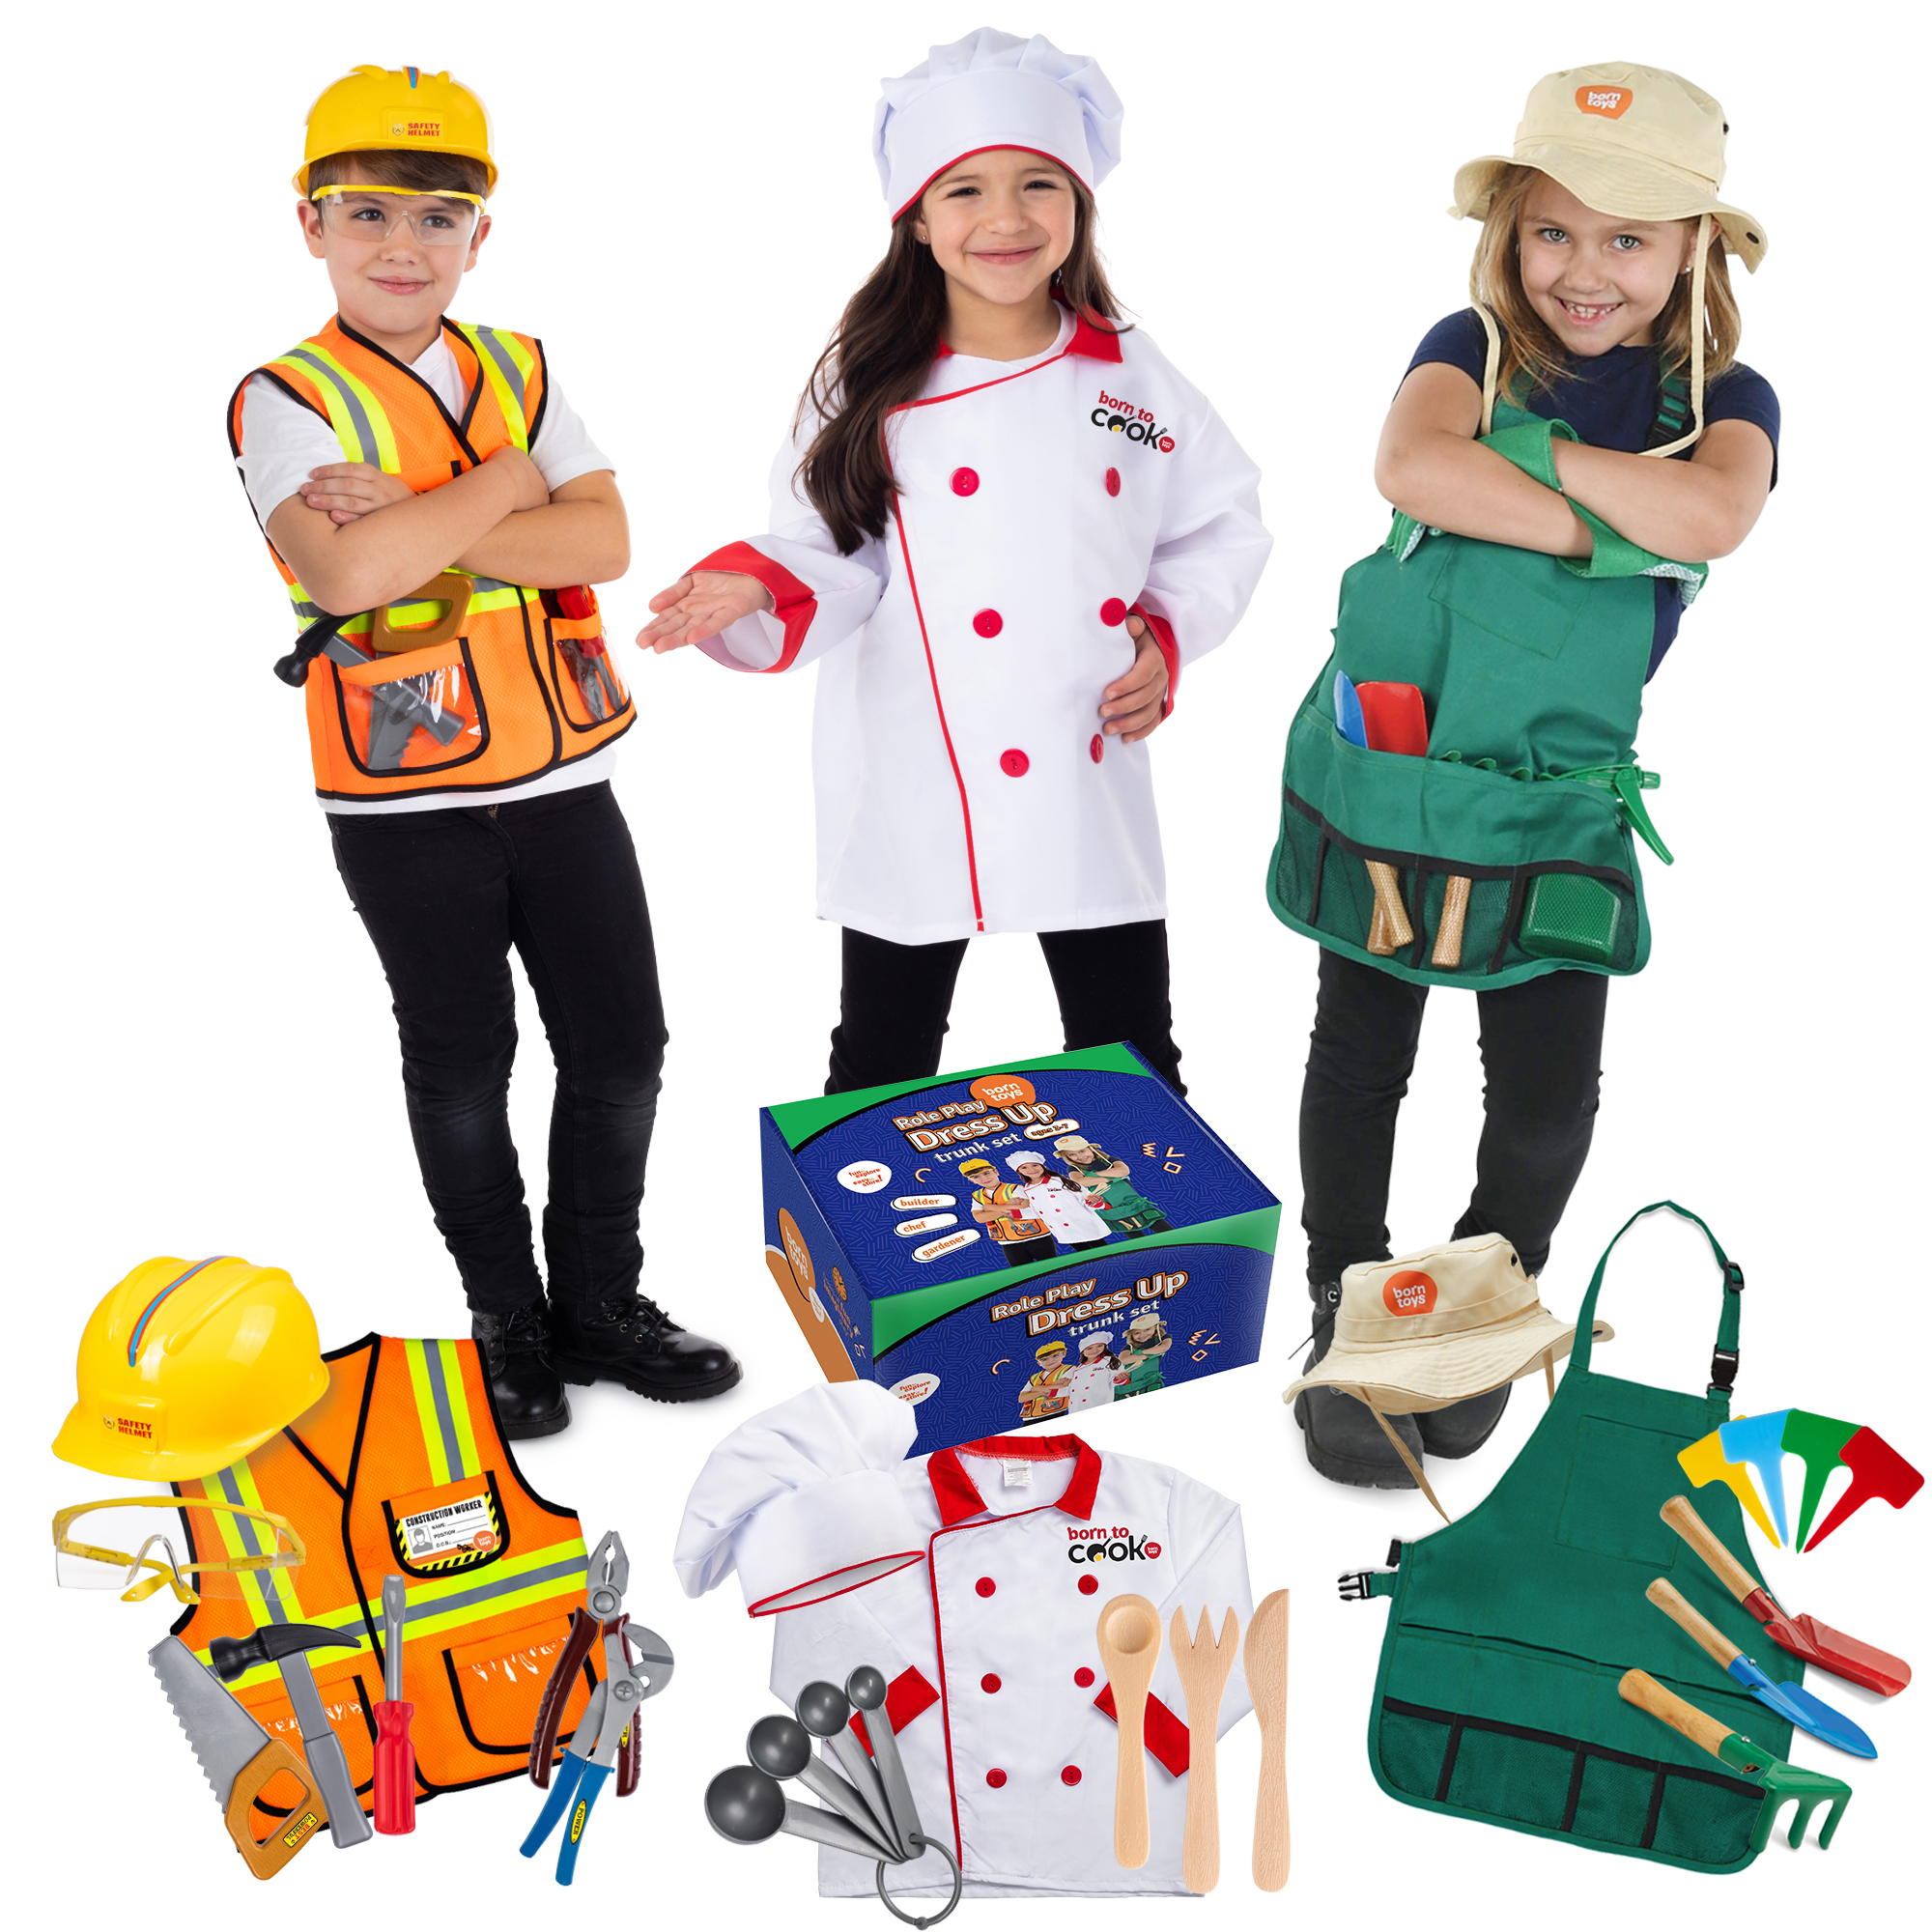 Bintiva Dress Up / Drama Play Helping At Home Trunk Set, Construction Worker-Chef-Gardener image number null